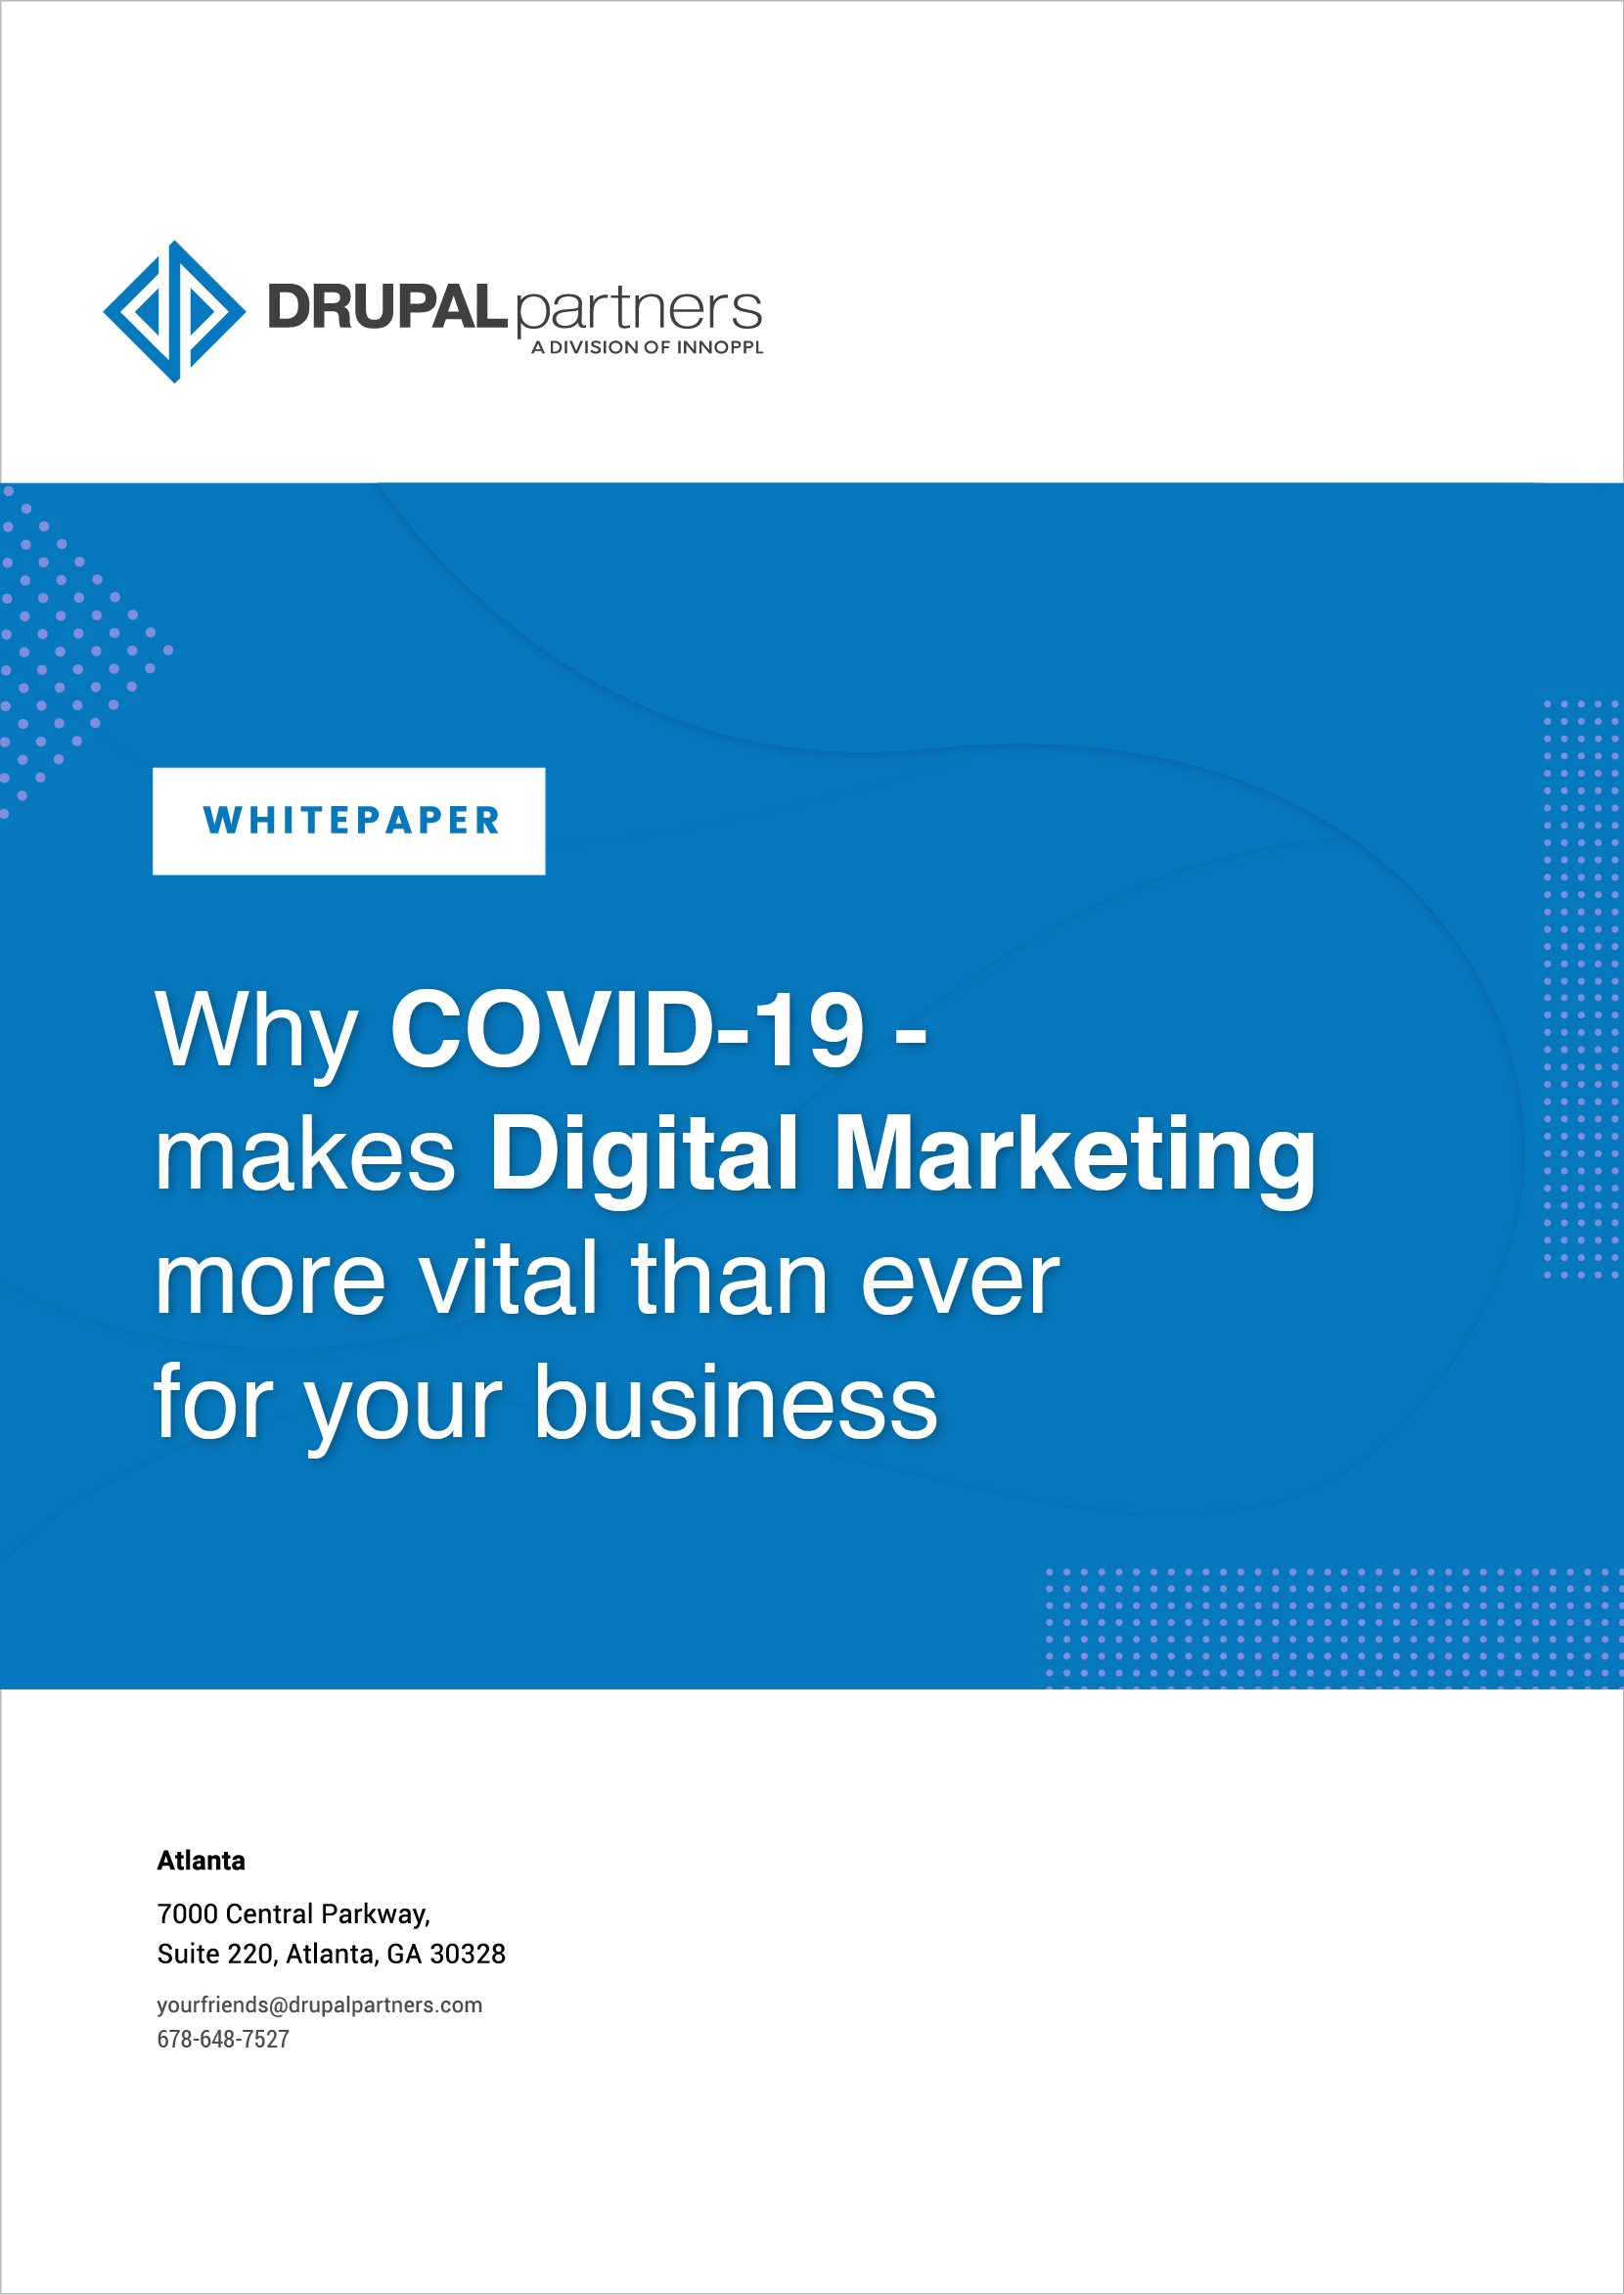 Why COVID-19 - Makes Digital Marketing More Vital Than Ever For Your Business